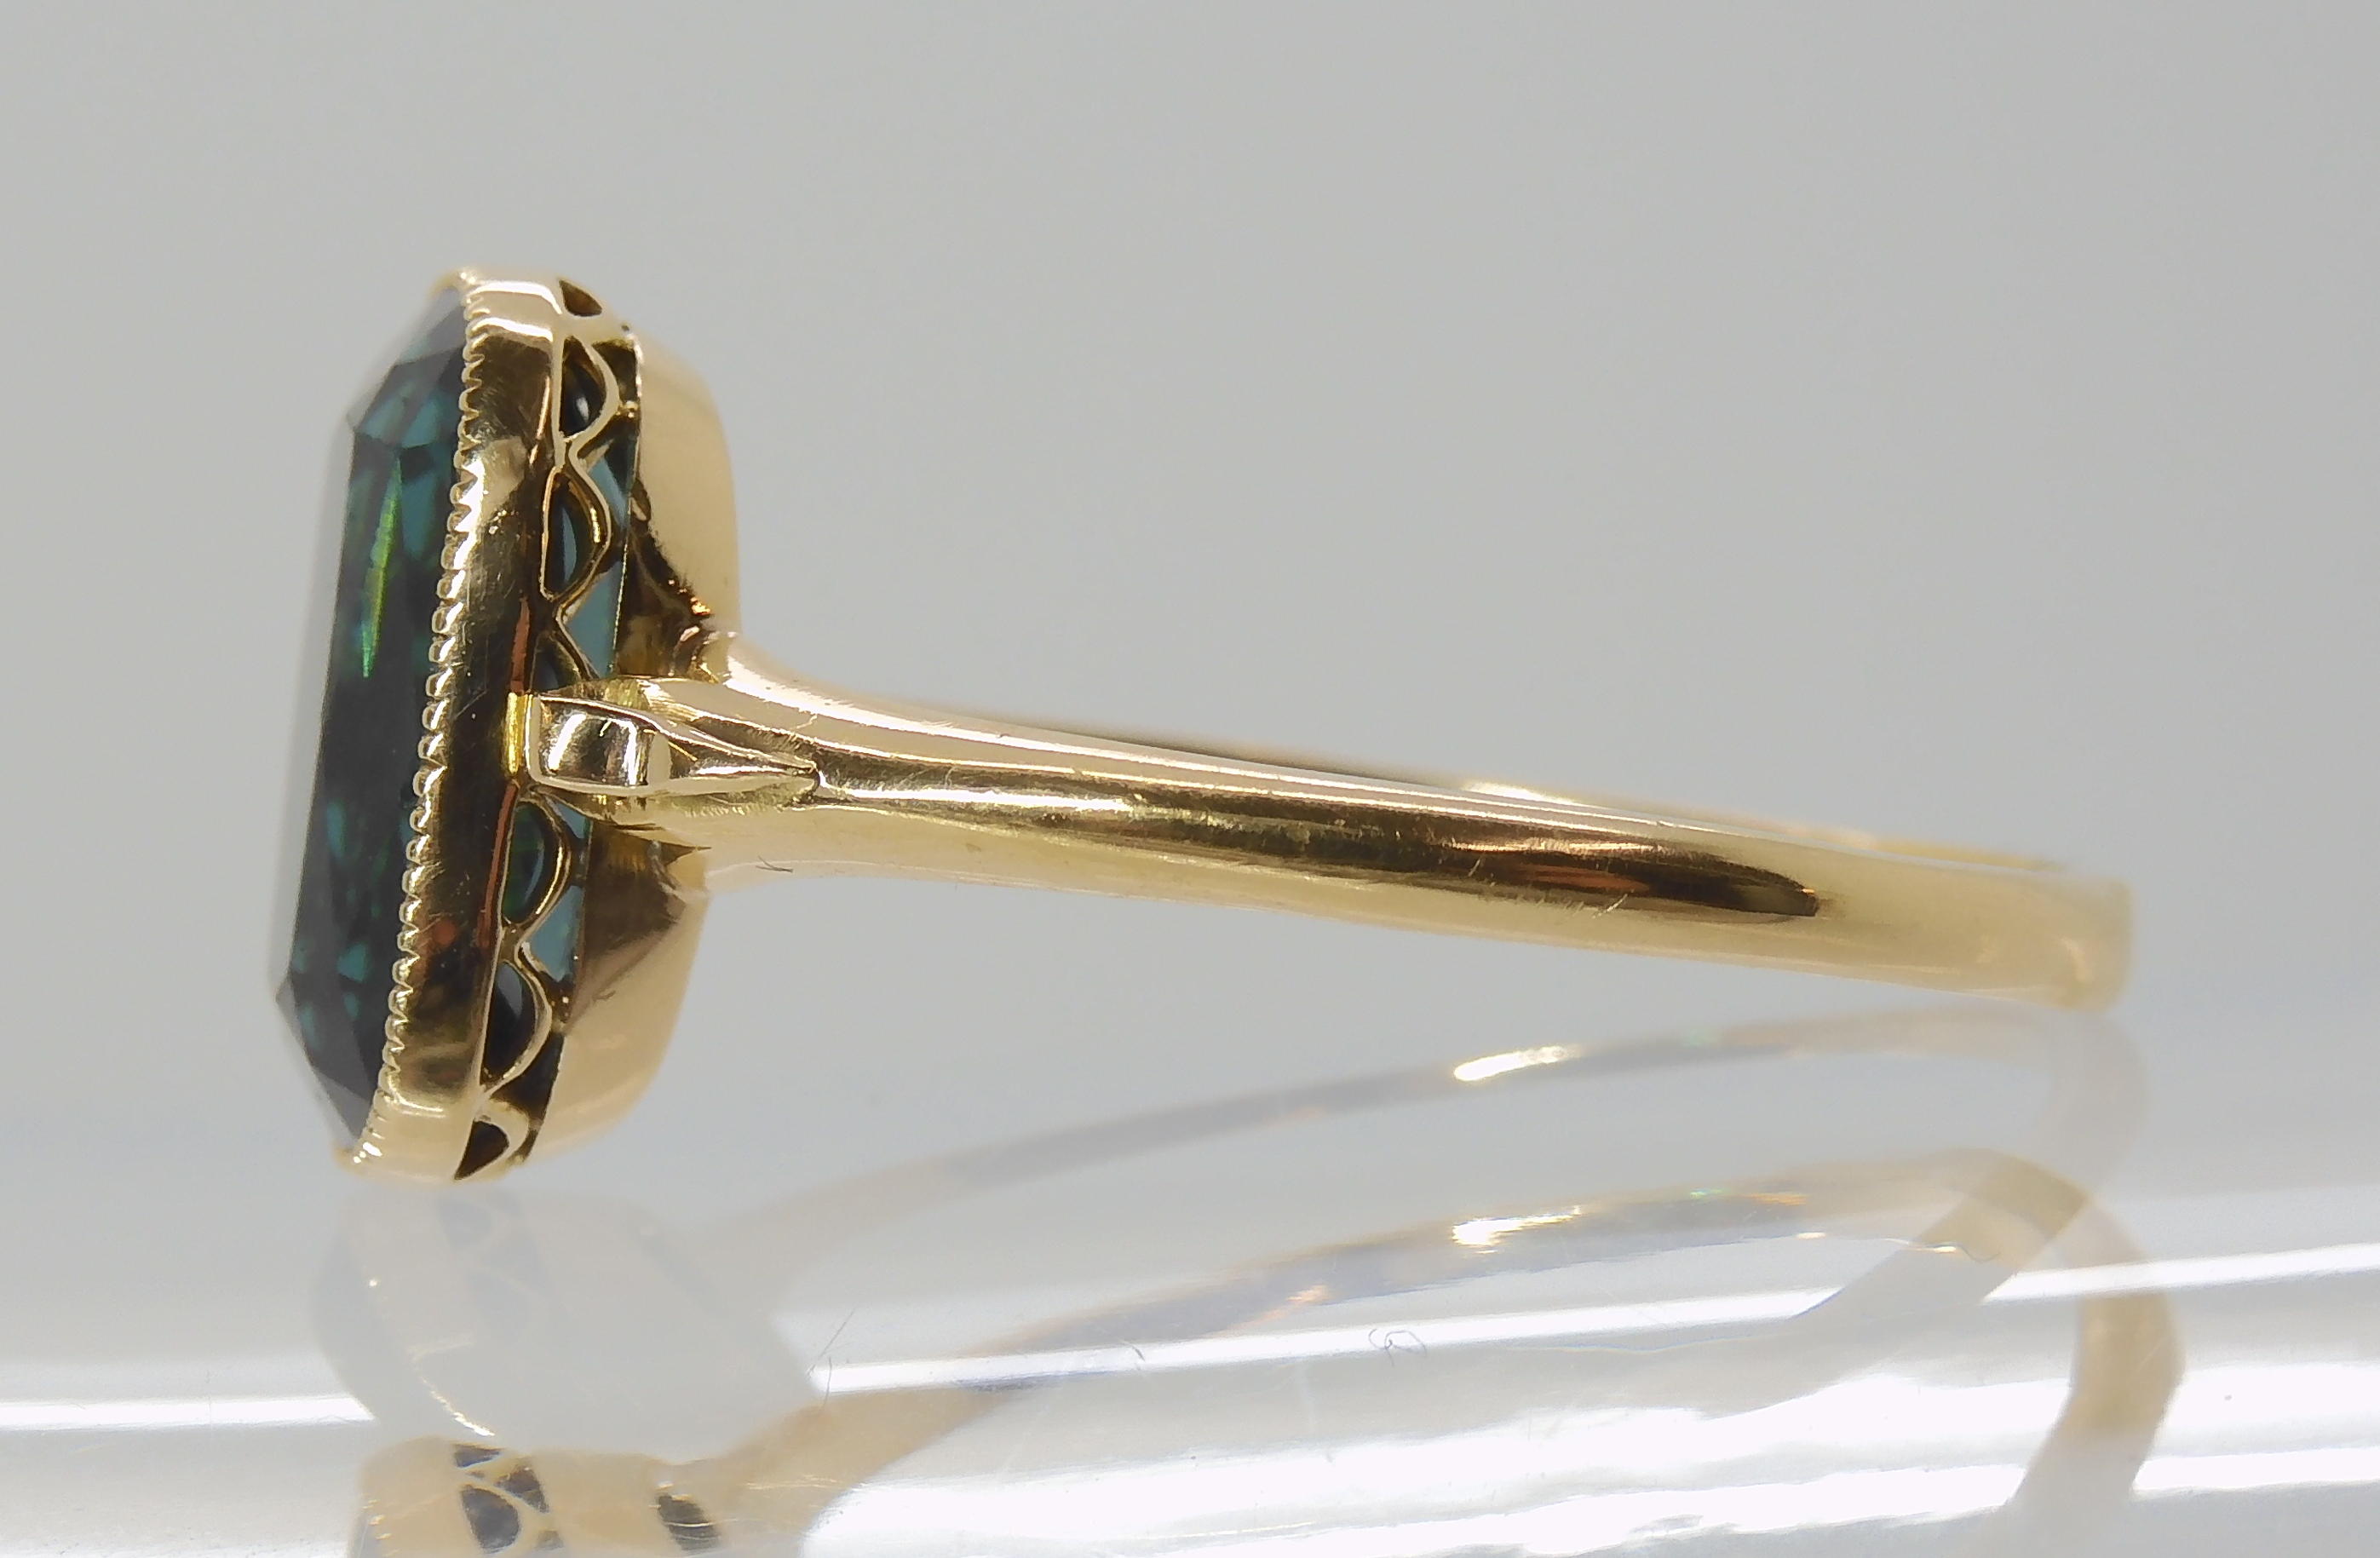 A TEAL COLOURED TOURMALINE RING mounted in bright yellow metal, with decorative scroll shoulders, - Image 4 of 4